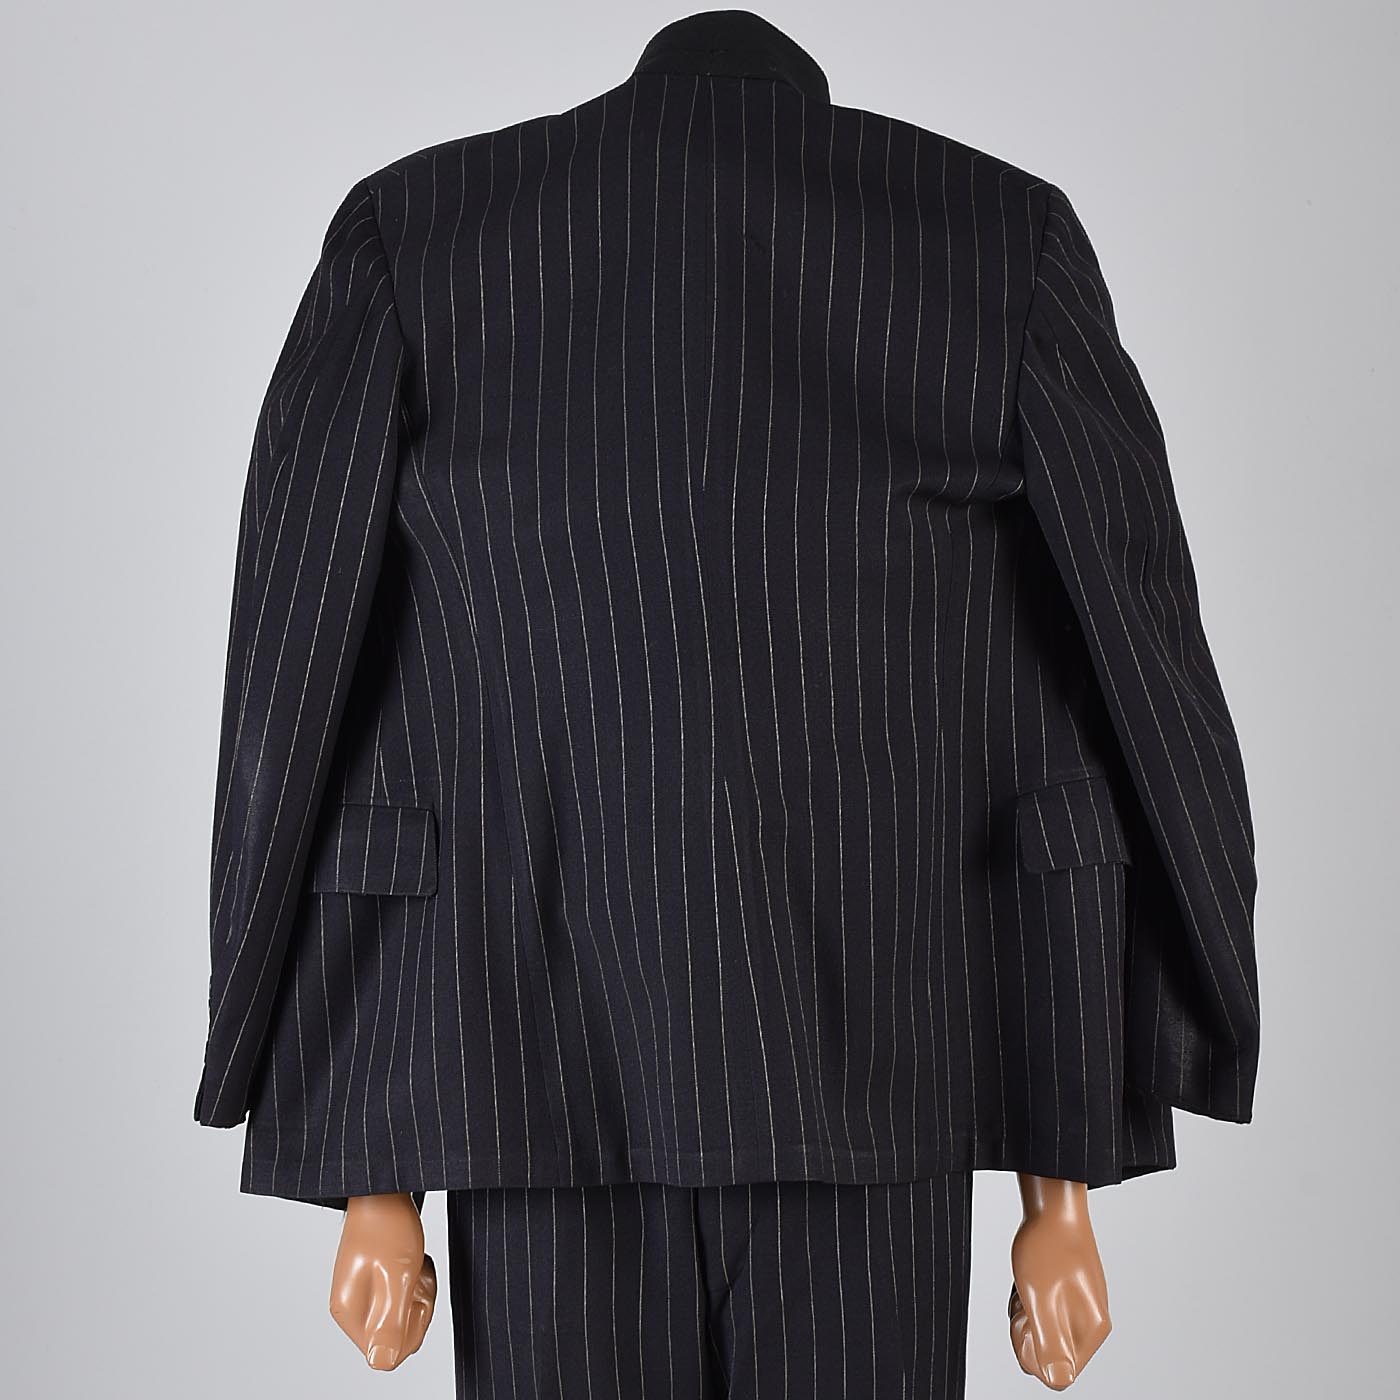 1940s Men's Four Piece Black Pinstripe Suit Double Breasted & Button Fly